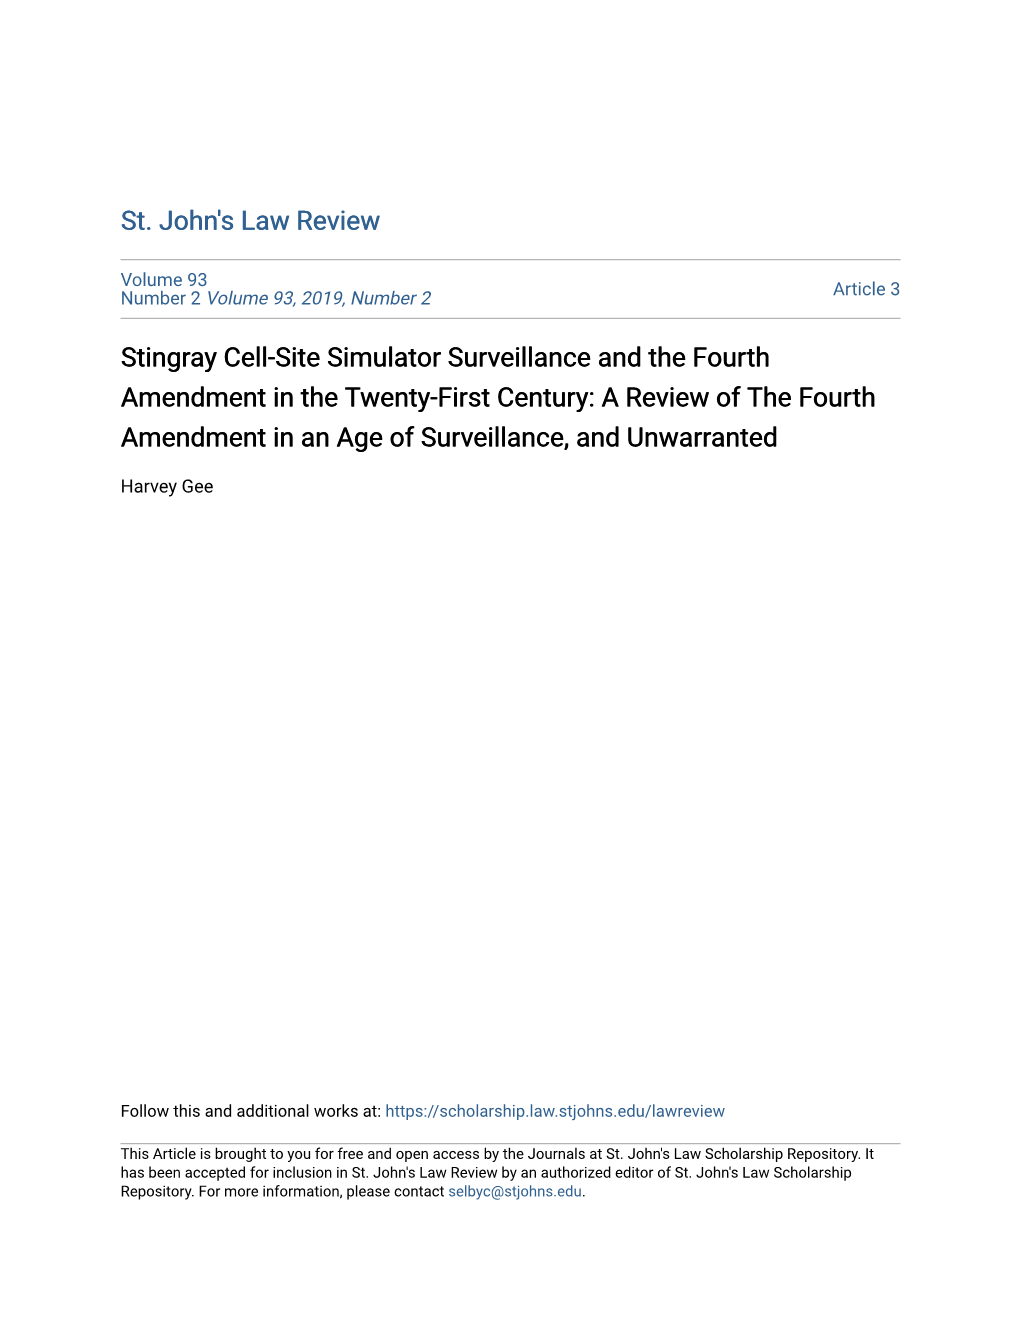 Stingray Cell-Site Simulator Surveillance and the Fourth